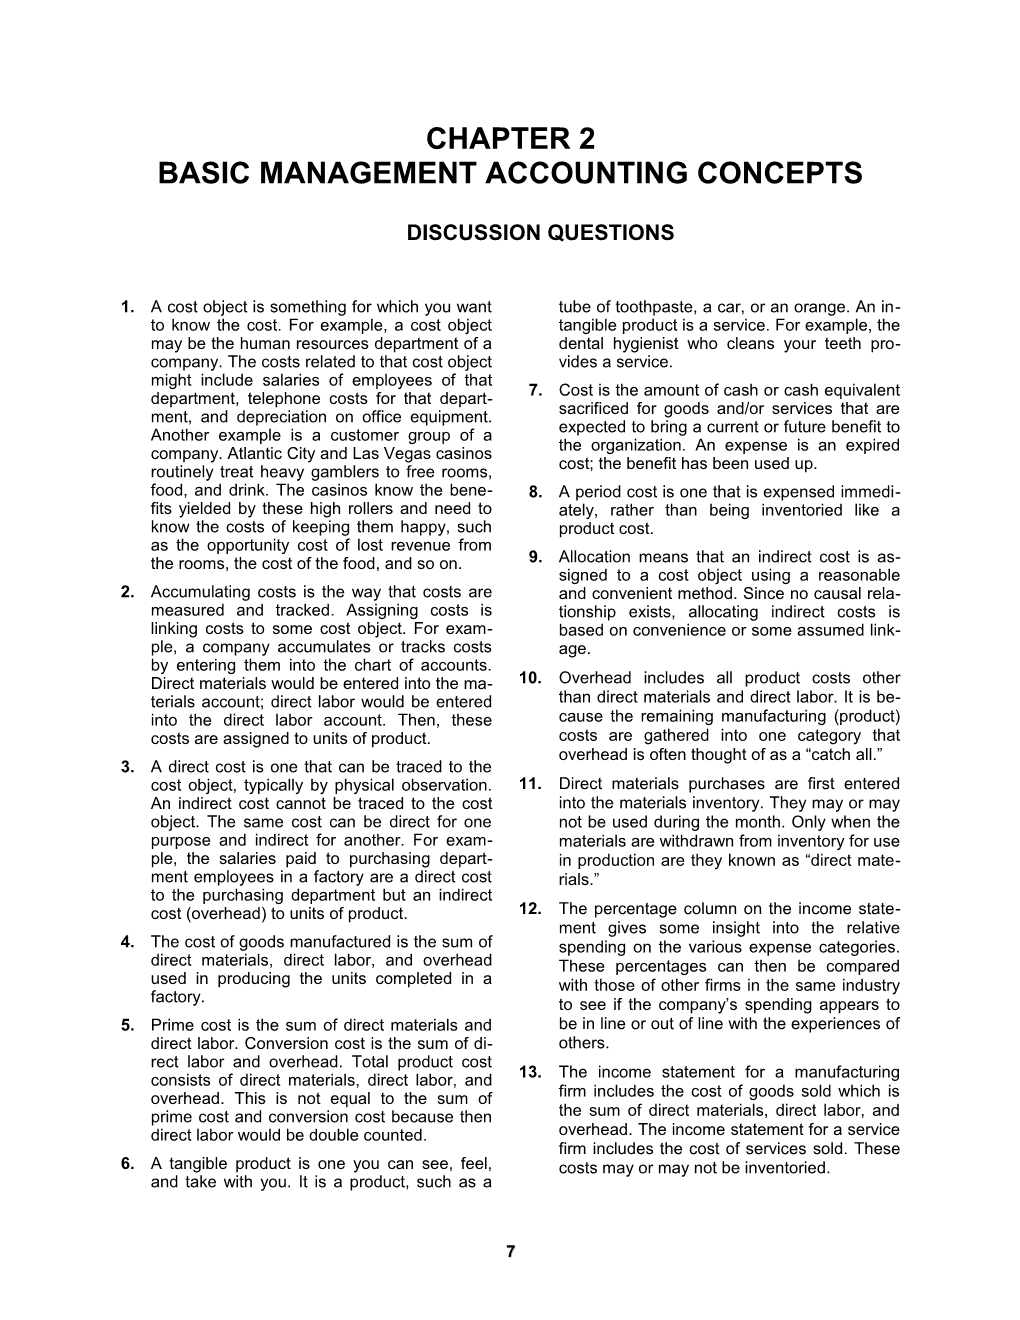 Chapter 2Basic Management Accounting Concepts